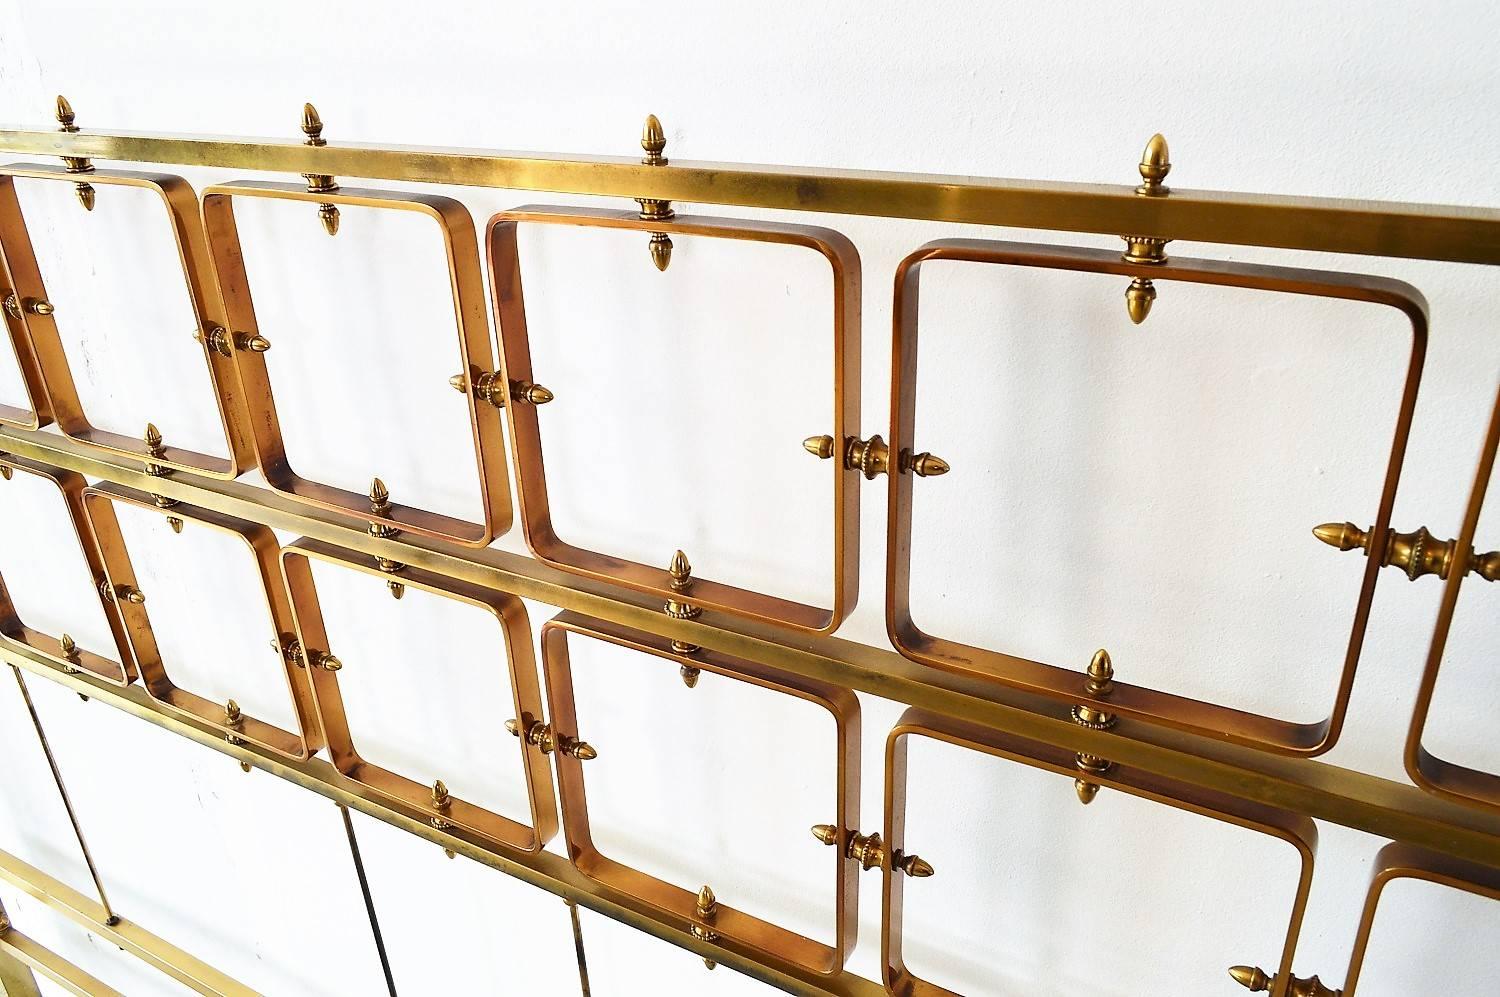 Elegant sculptural Italian Mid-Century Modern bed frame made of full, shiny brass with fantastic patina.
The headboard and footboard, composed of countless details are made of solid shiny brass.
The parts which are hidden under the mattress are